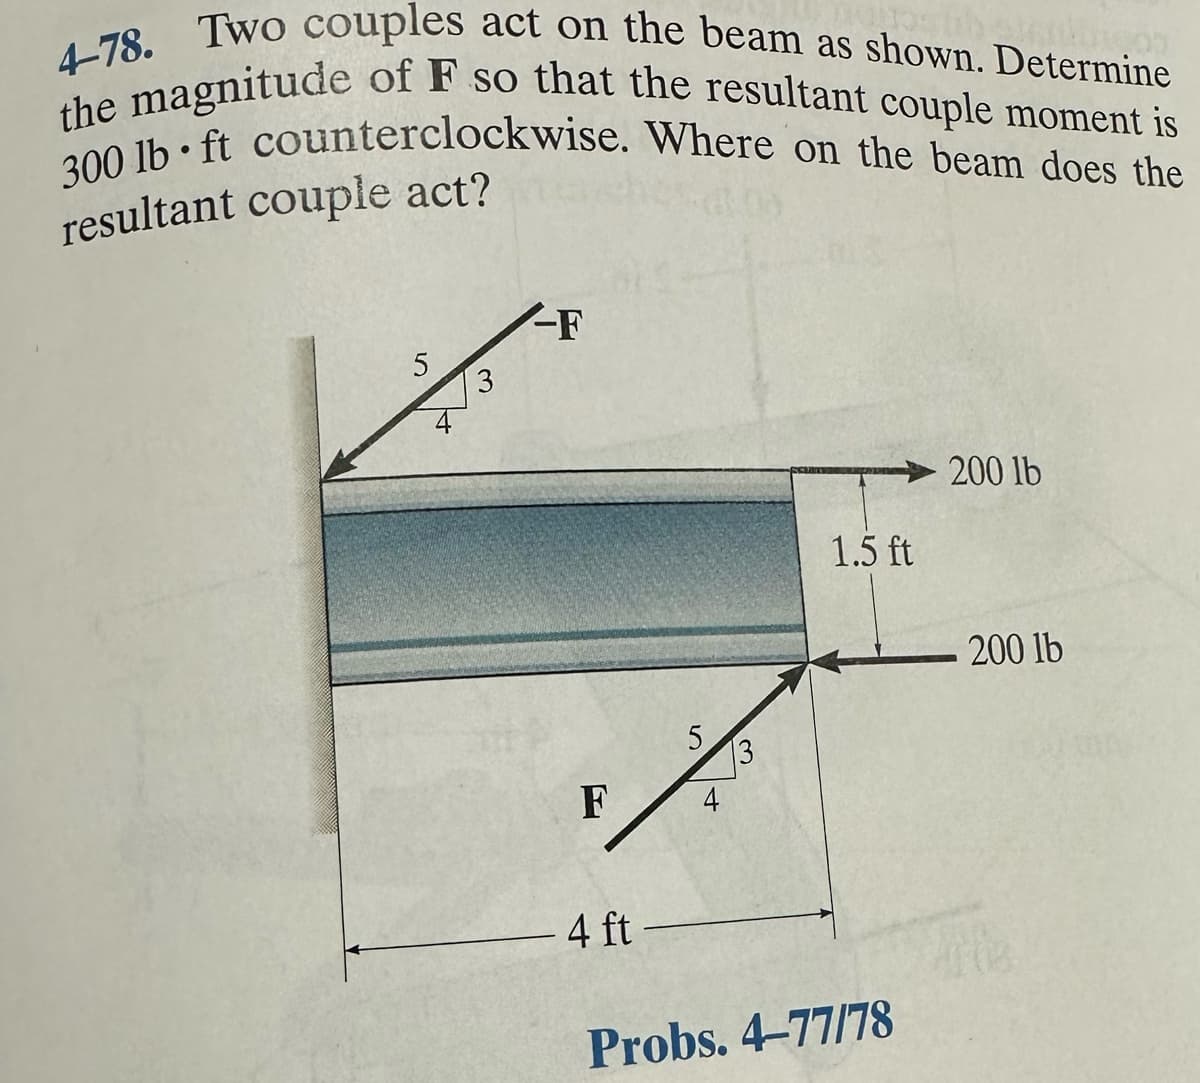 4-78. Two couples act on the beam as shown. Determine
the magnitude of F so that the resultant couple moment is
300 lb ft counterclockwise. Where on the beam does the
resultant couple act?
●
5
-F
F
4 ft
5
3
1.5 ft
Probs. 4-77/78
200 lb
200 lb